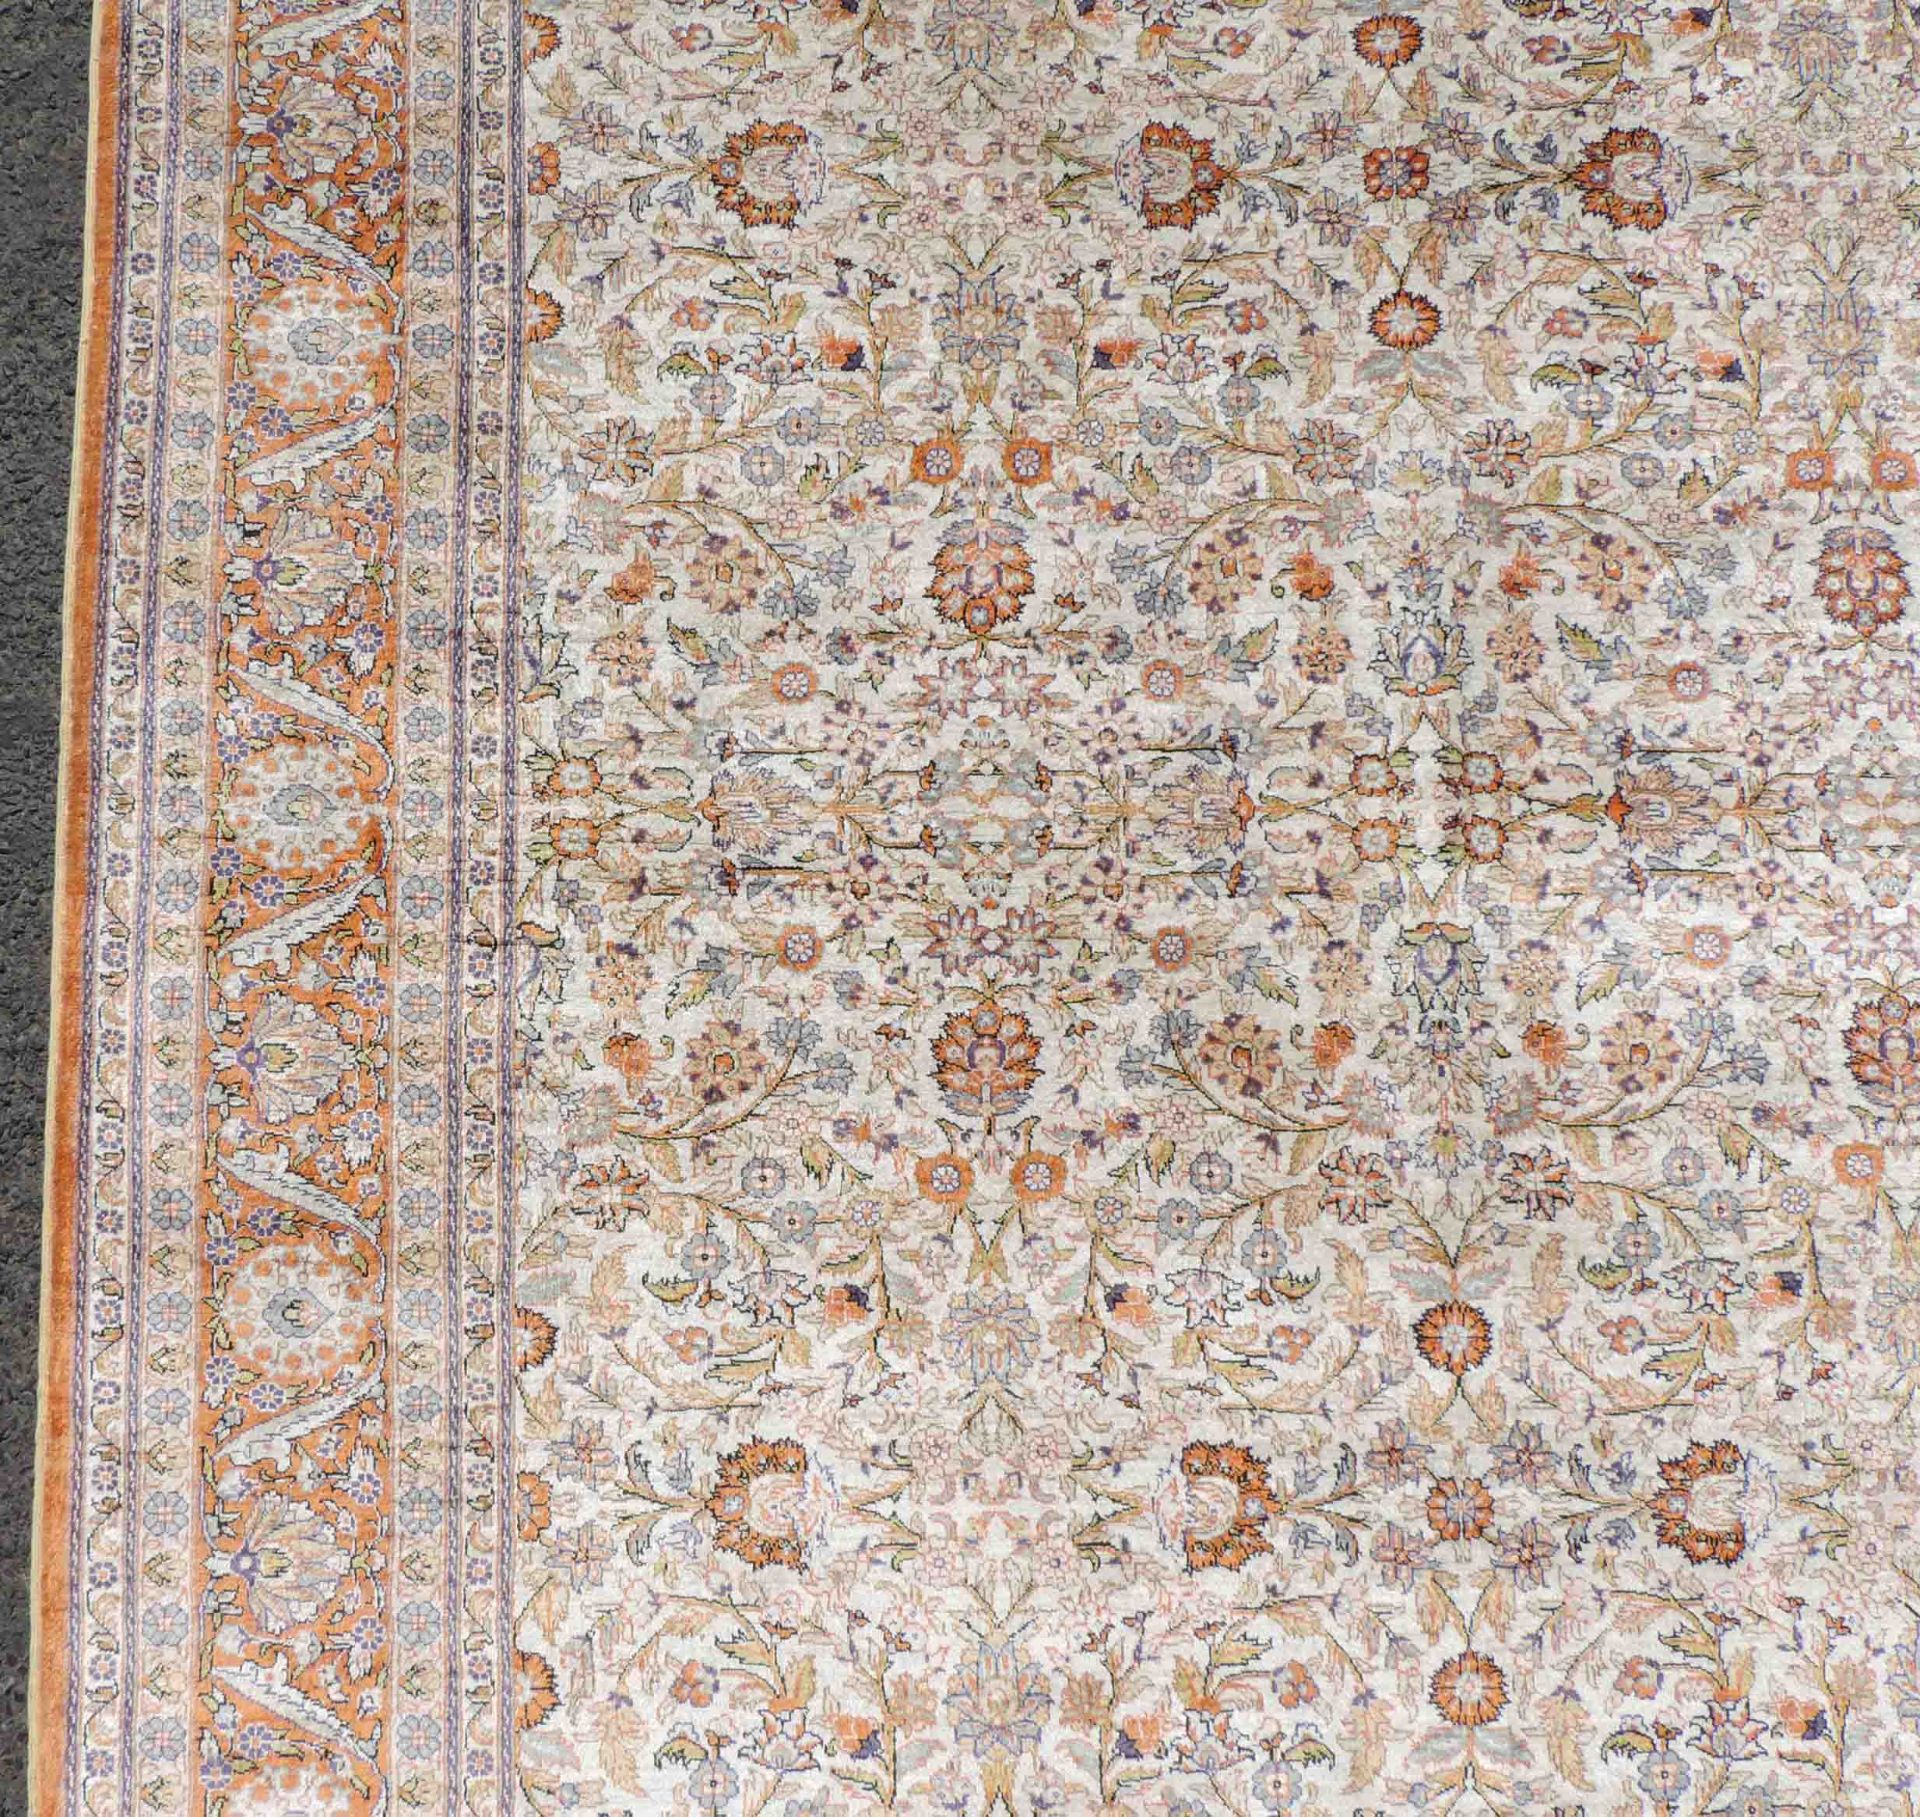 Hereke silk rug. Turkey. Signed. Extremely fine weave.180 cm x 128 cm. Knotted by hand. Silk on - Image 6 of 11